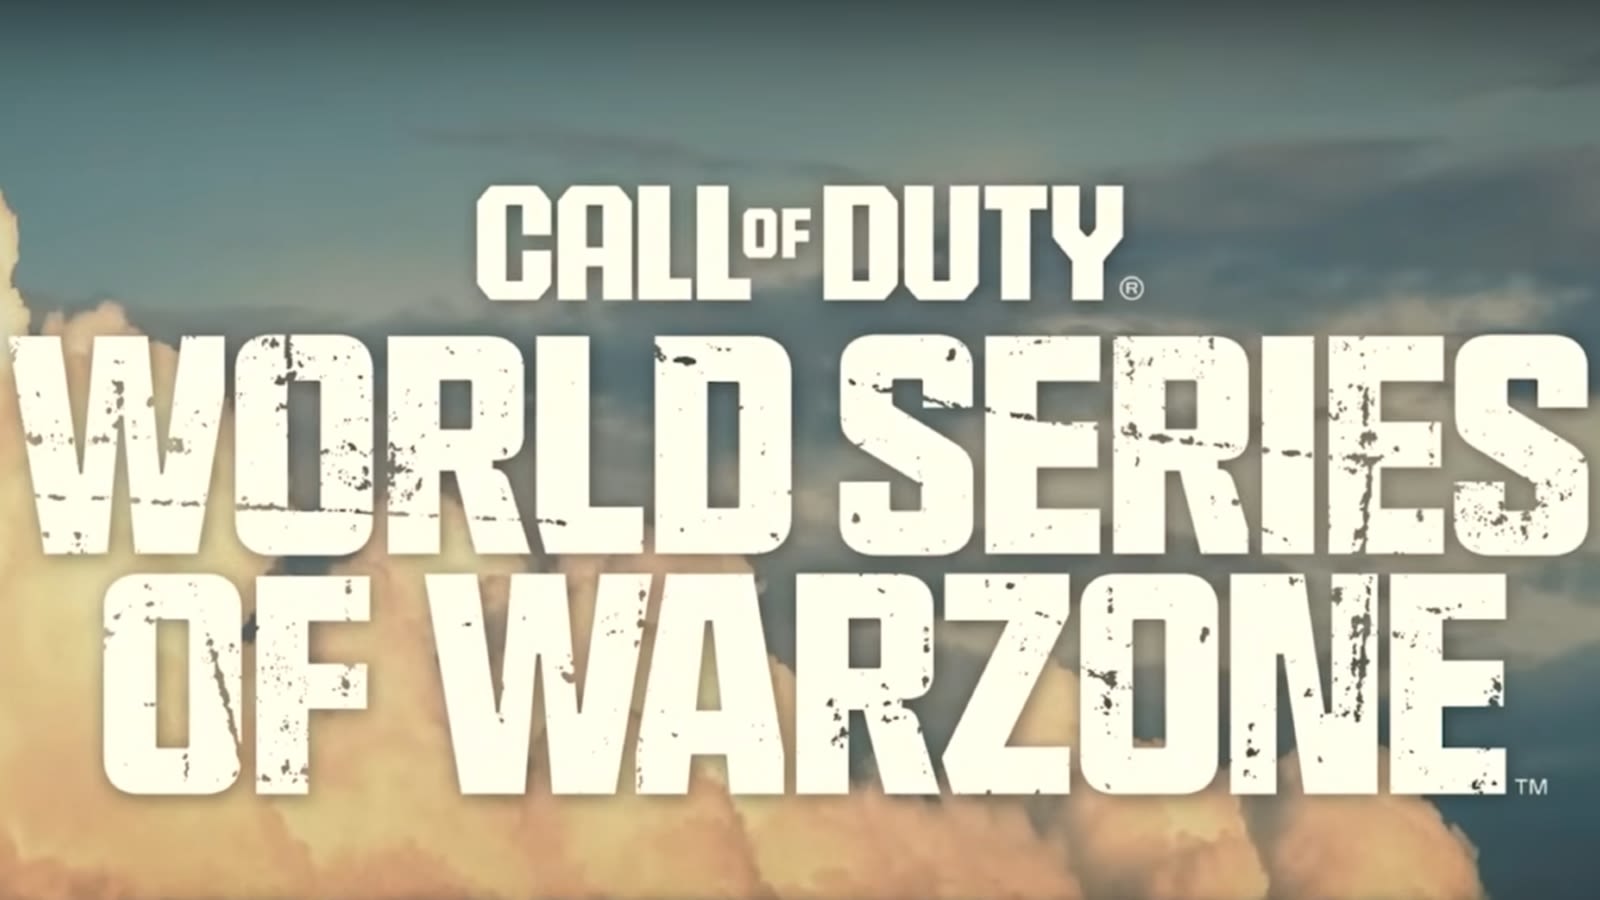 World Series of Warzone 2024: Schedule, format, prize pool, more - Dexerto